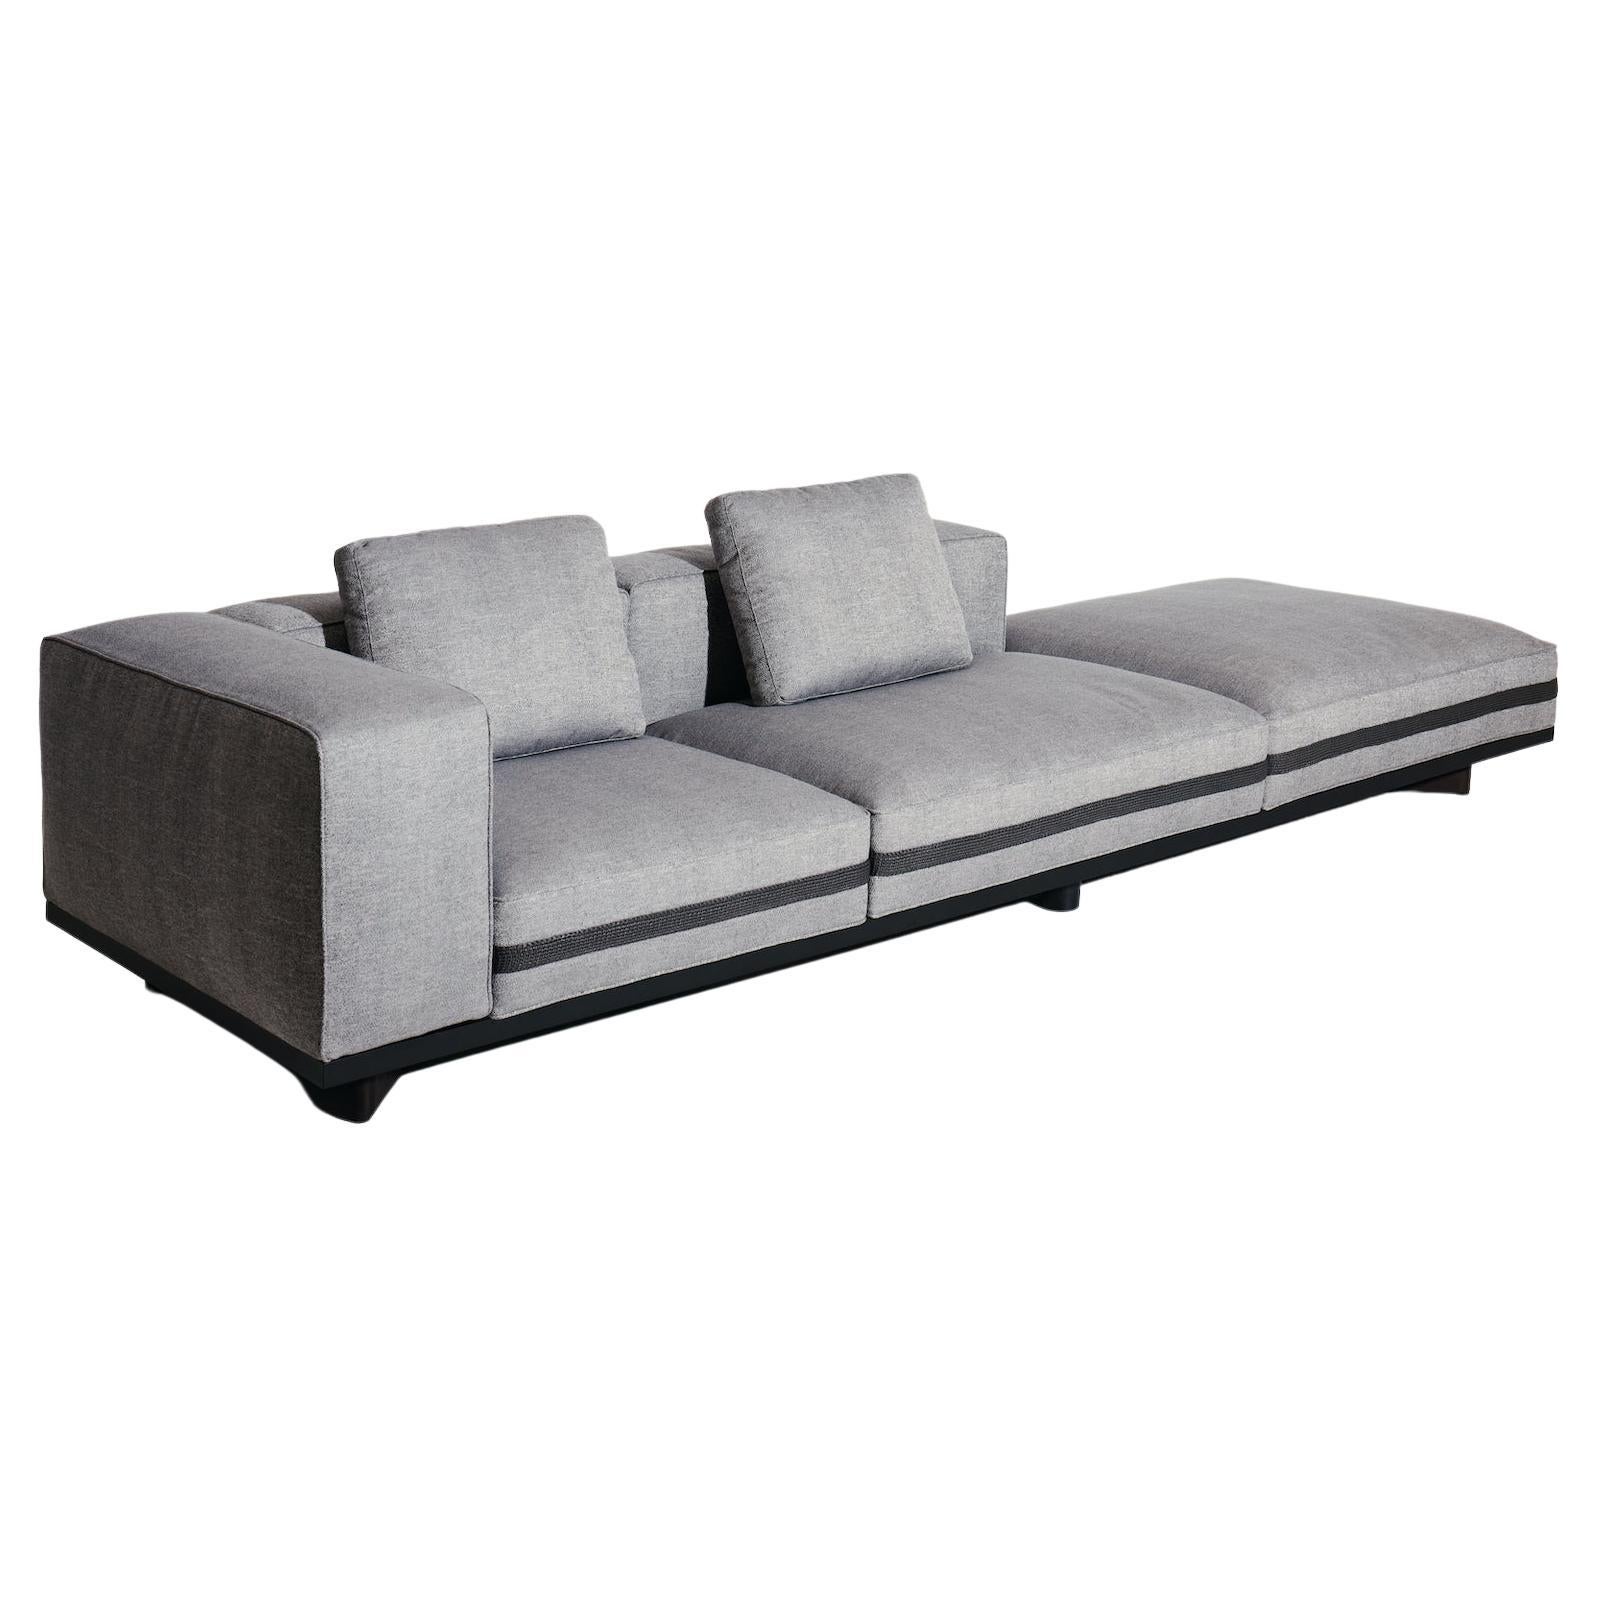 INDOOR OR OUTDOOR
Saint-Rémy is an outdoor sofa designed to incorporate the least number of elements possible, each with several possible uses for a decidedly modular product.
Saint-Rémy is an outdoor sofa designed to incorporate the least number of